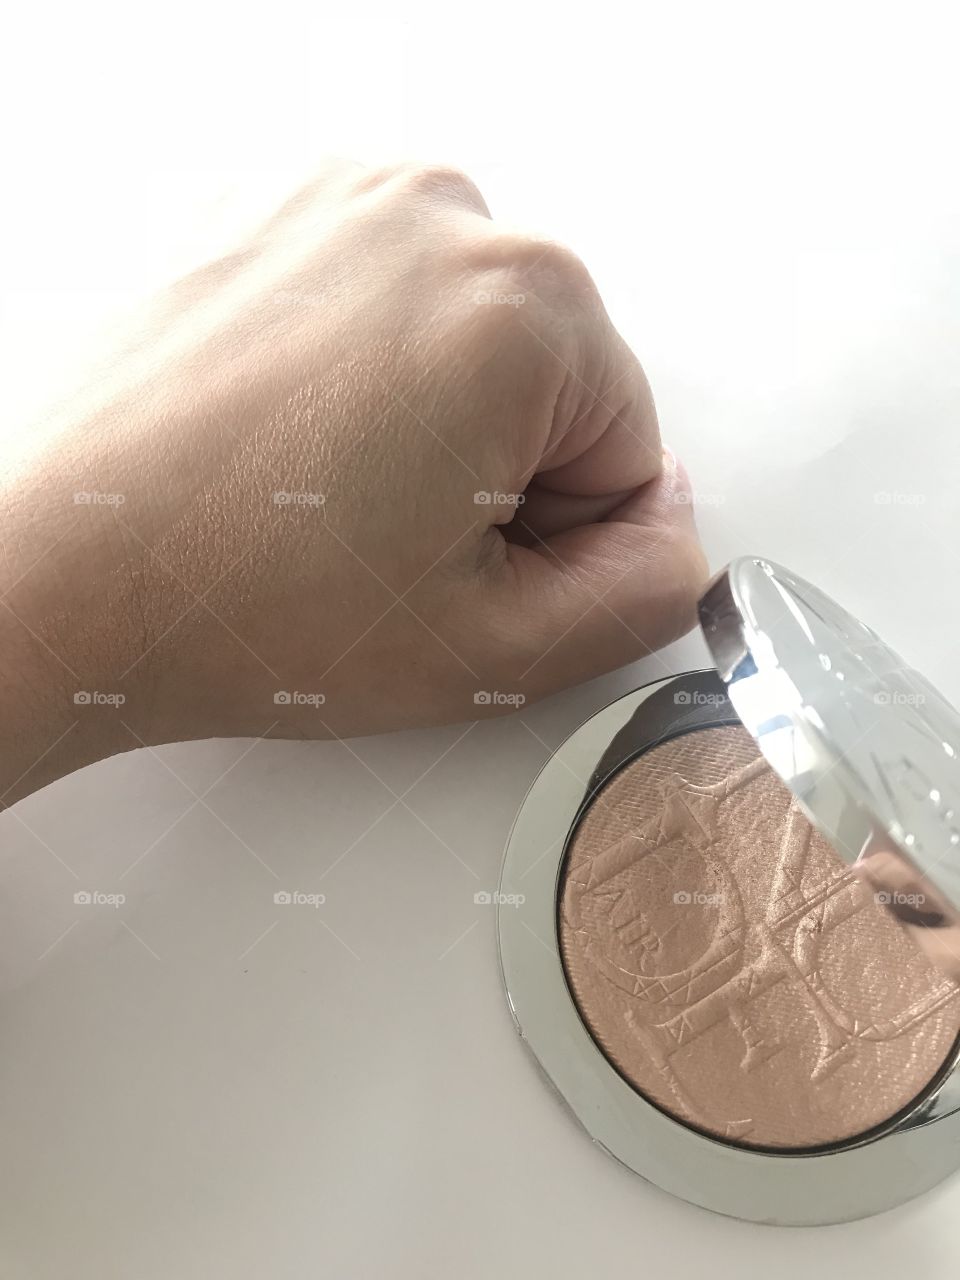 Makeup swatches of dior glow highlighter. Makeup luxury brands are key for wealth. 